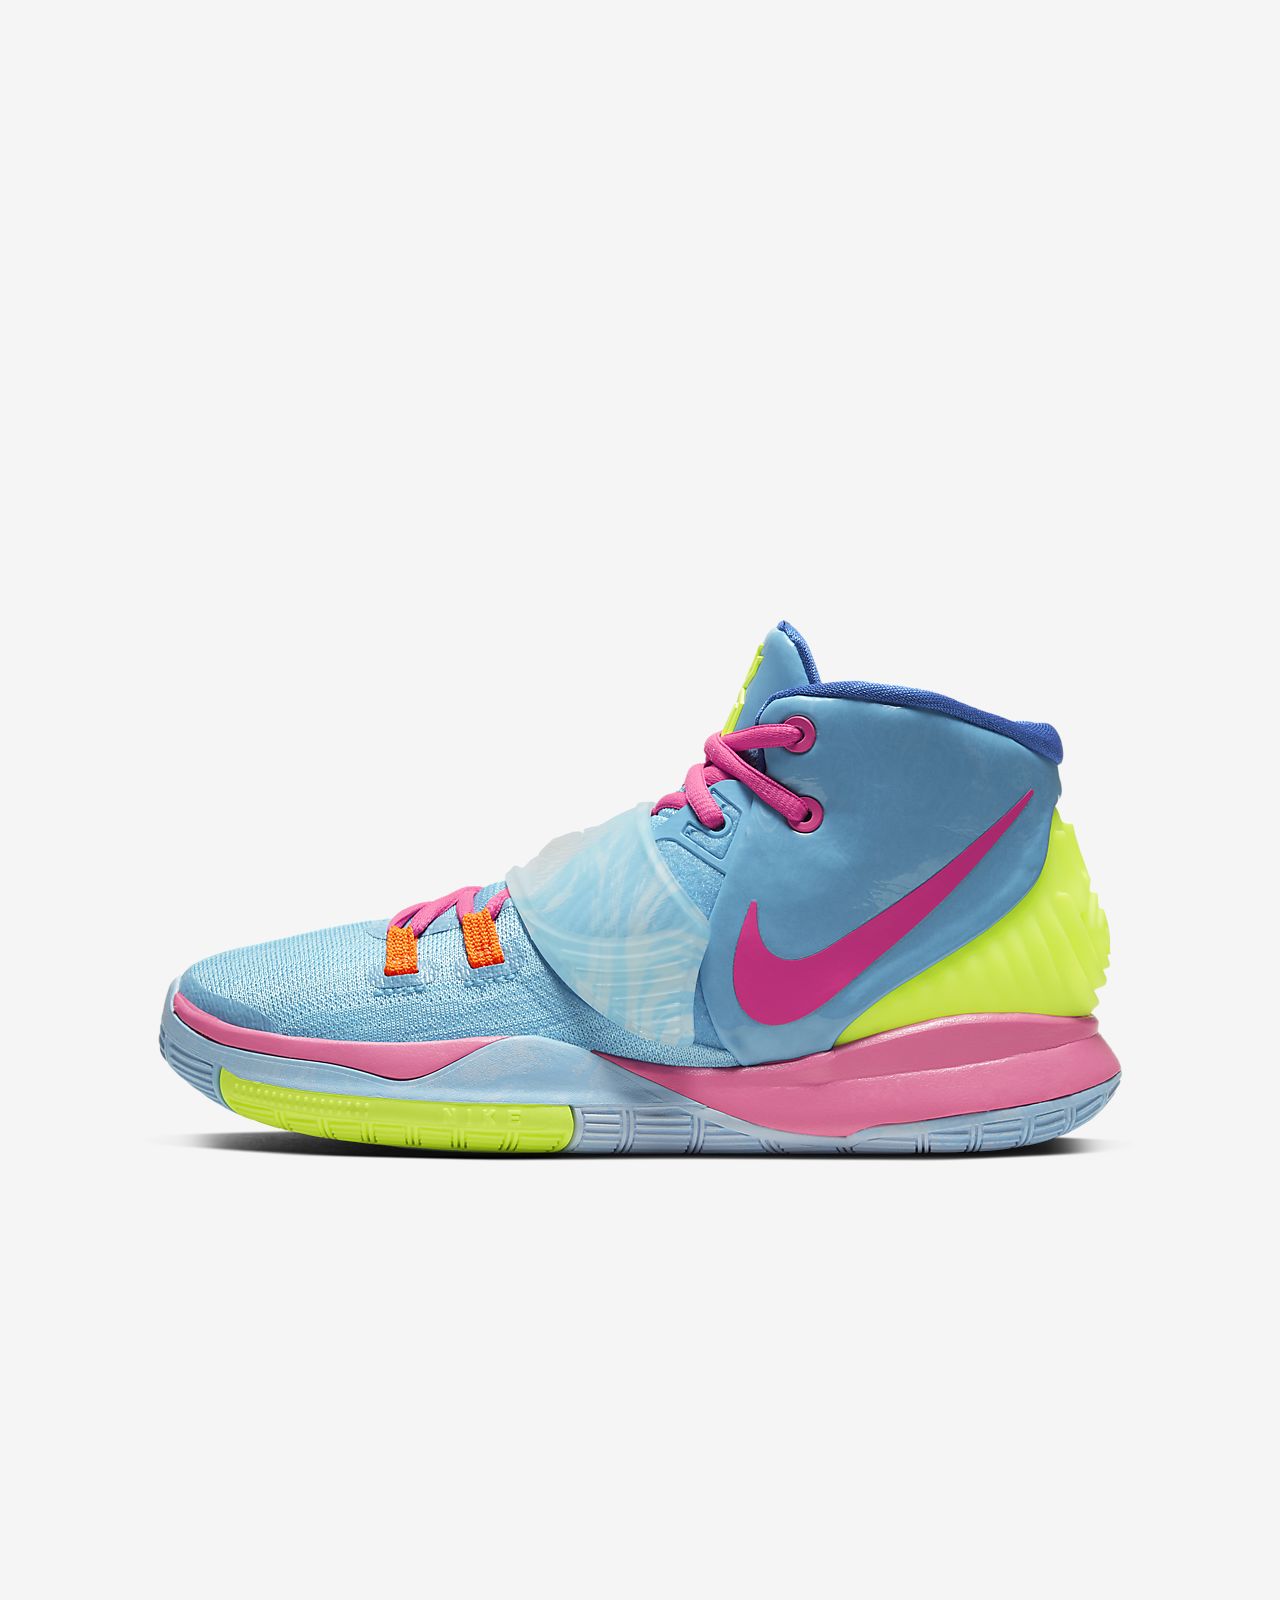 kyrie 6 shoes boys cheap online